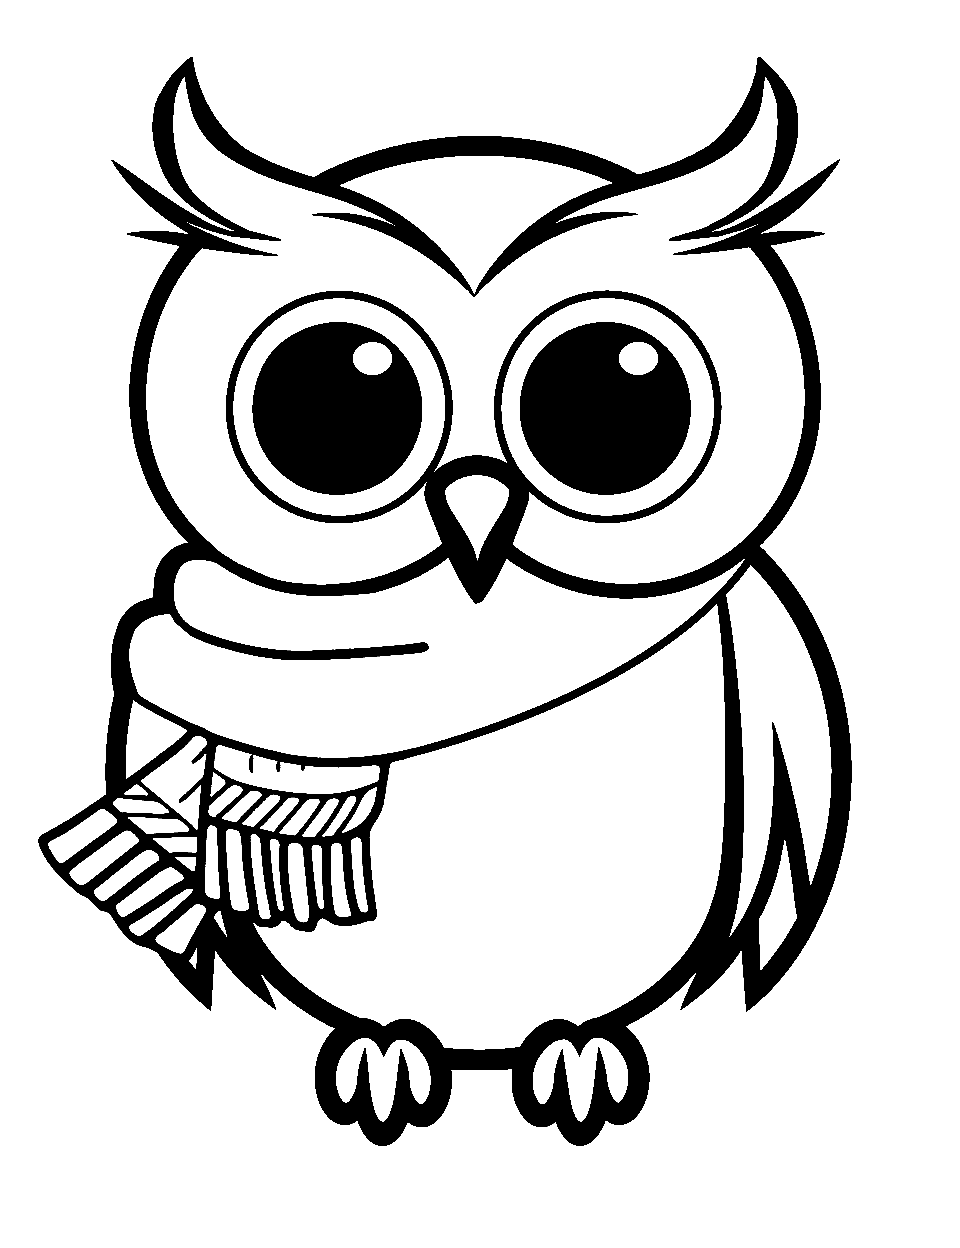 Owl coloring pages free printable sheets